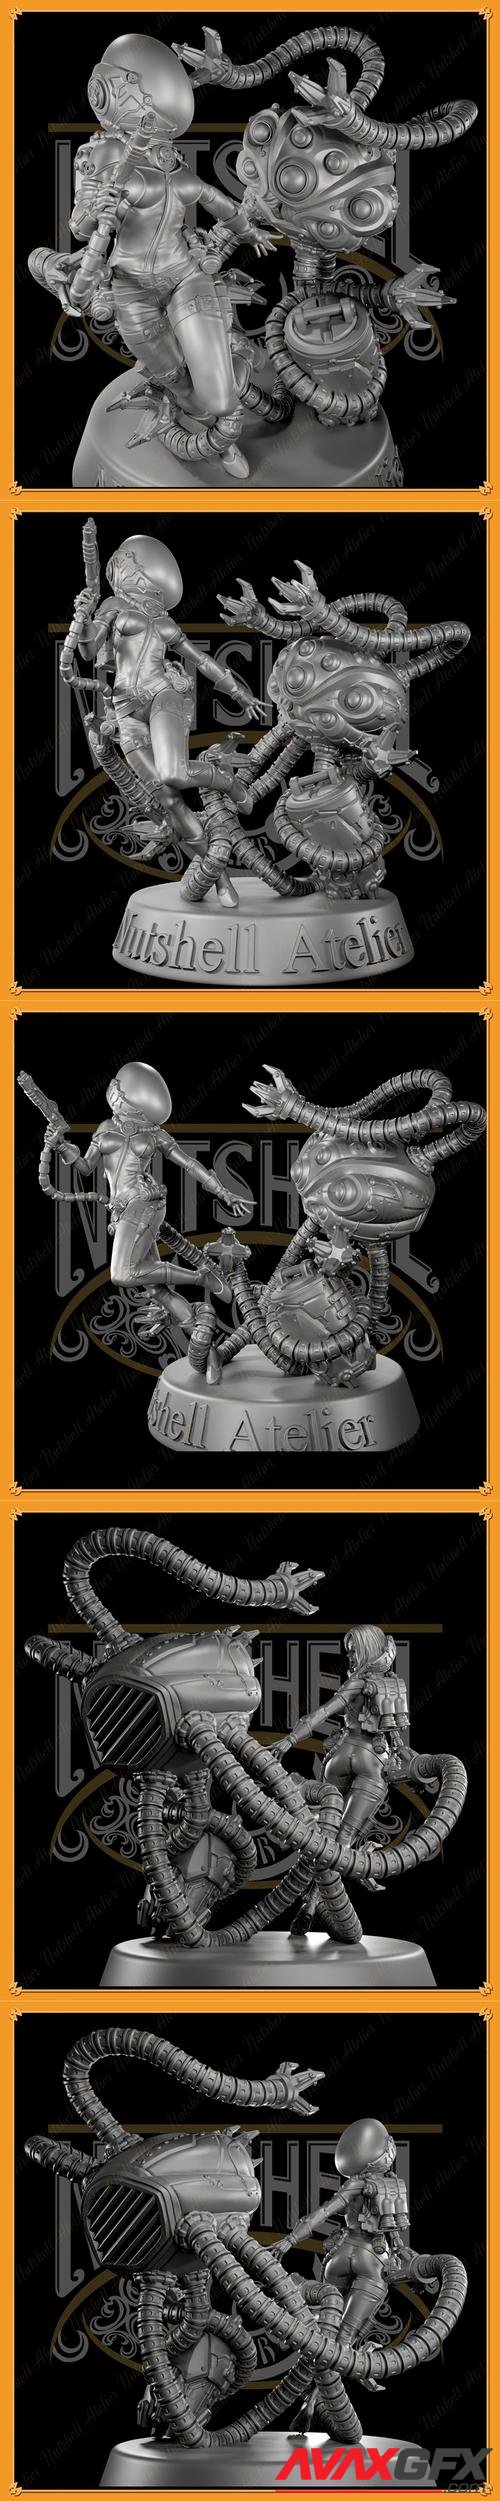 Nutshell Atelier - Space girl and Monster – 3D Print